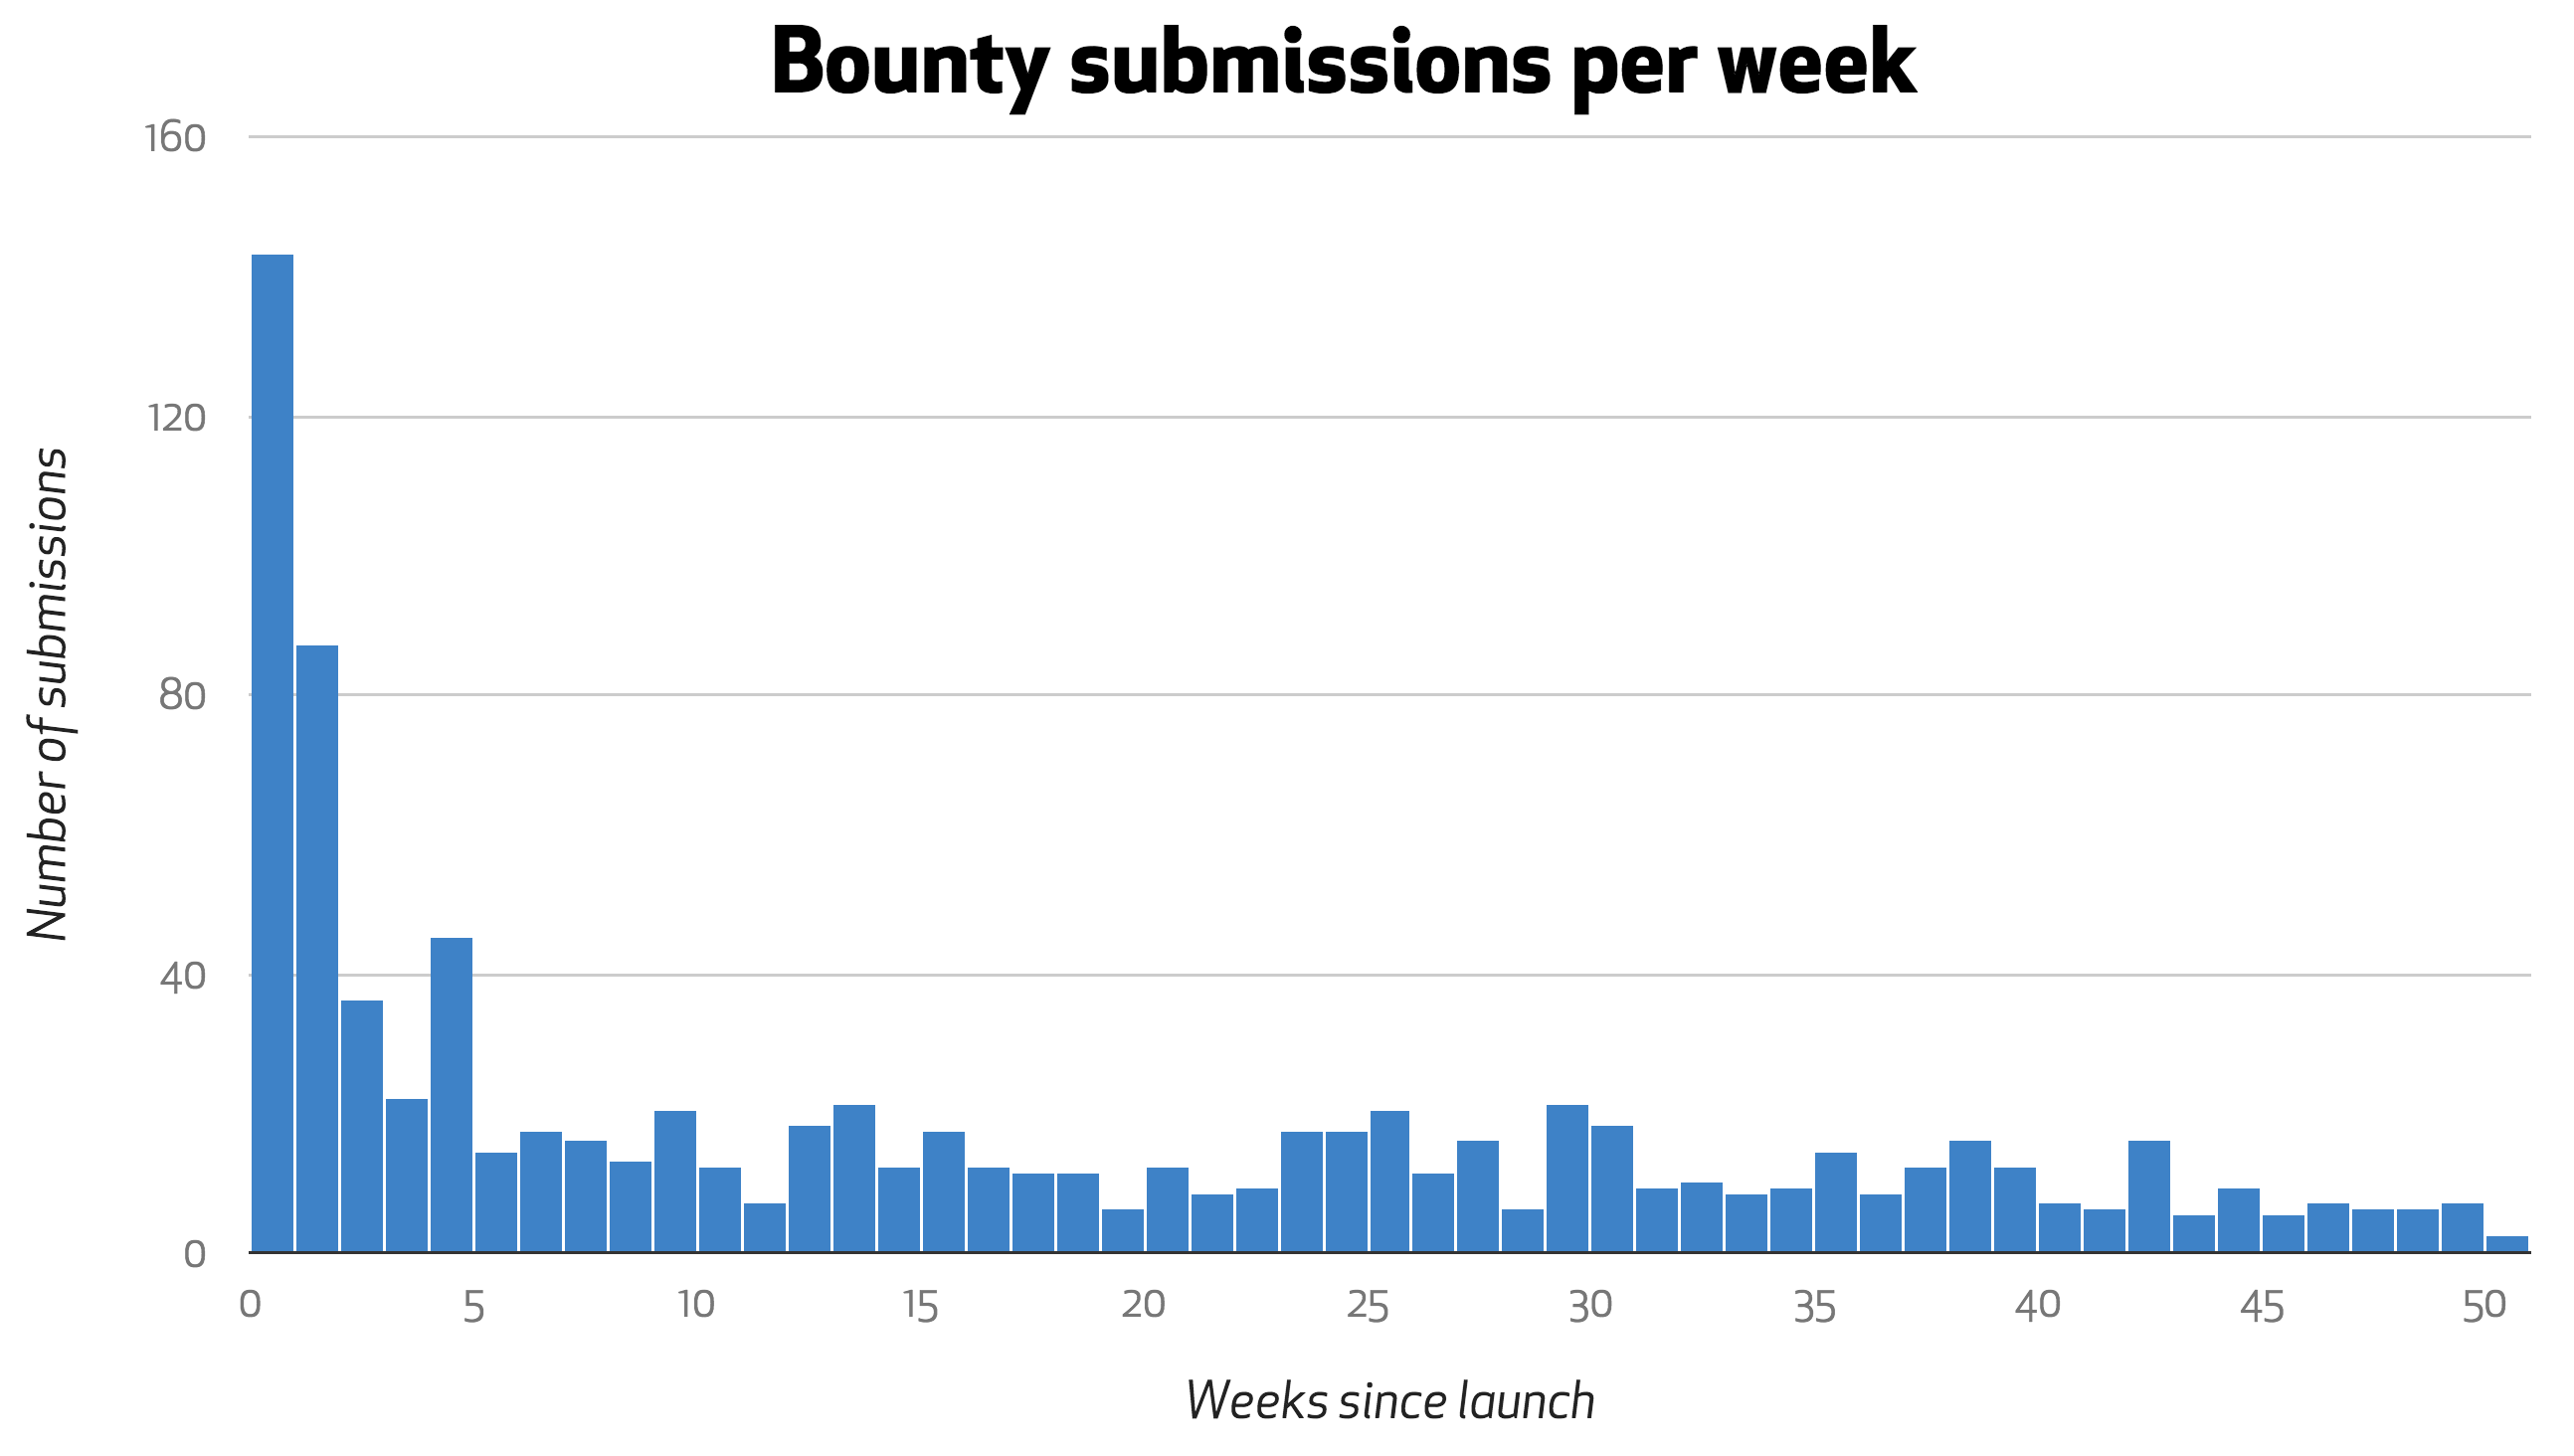 Bounty submissions per week